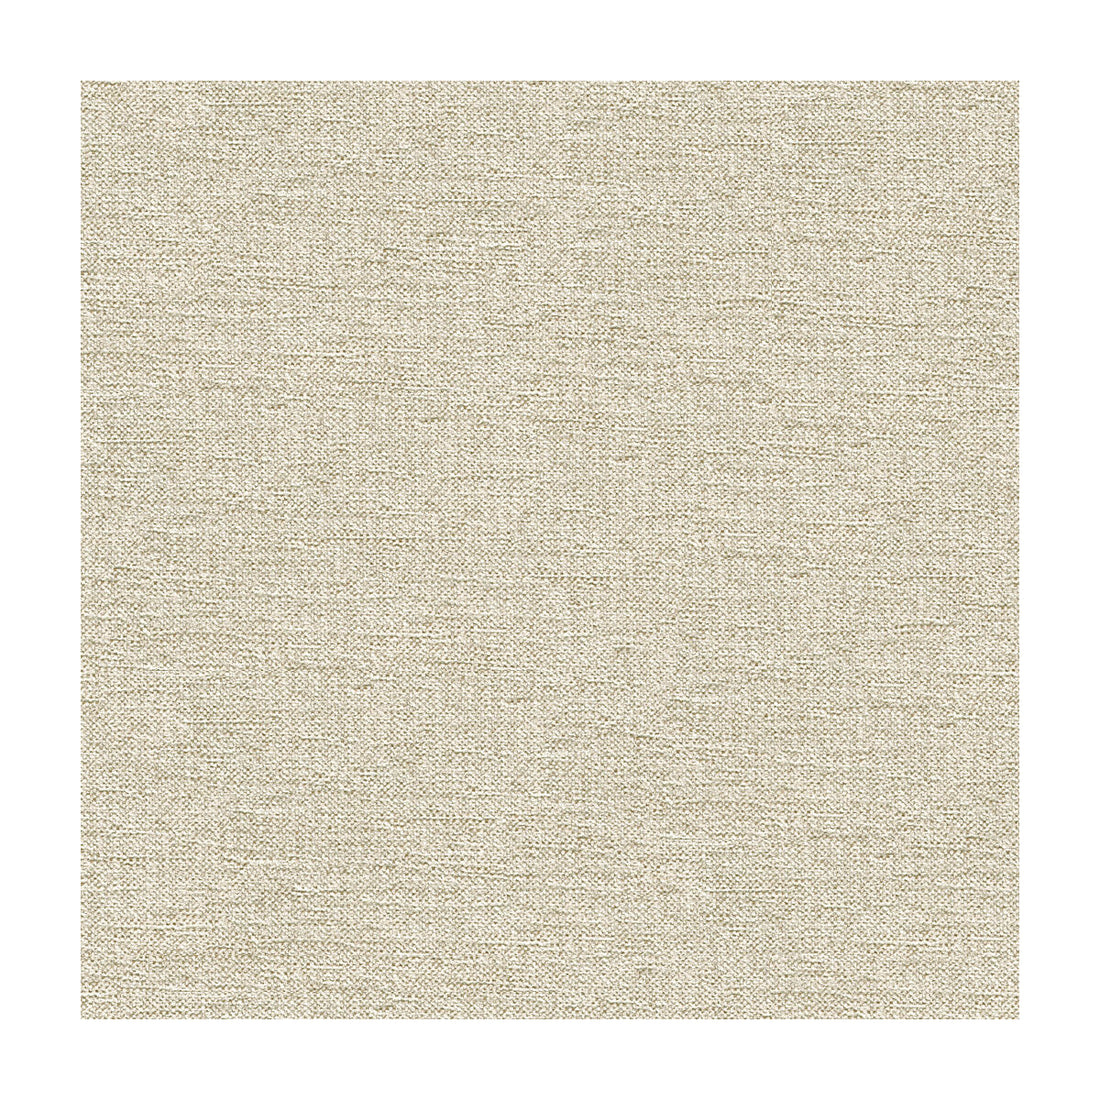 Kravet Contract fabric in 33876-1601 color - pattern 33876.1601.0 - by Kravet Contract in the Crypton Incase collection